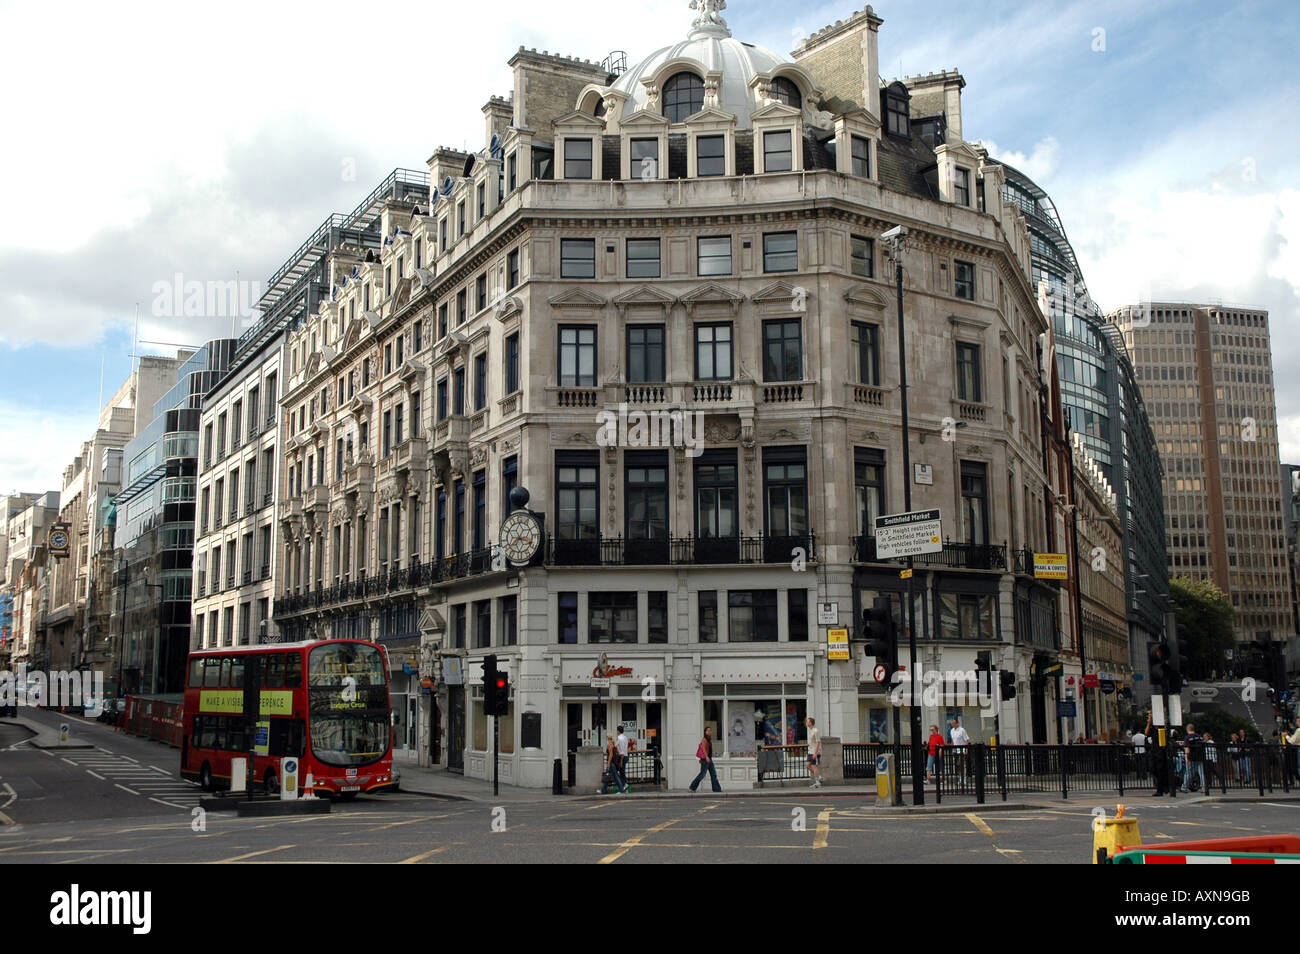 Ludgate House building on Ludgate Circus, crossroads of Farringdon Street, Ludgate Hill and Fleet Street in London, UK Stock Photo